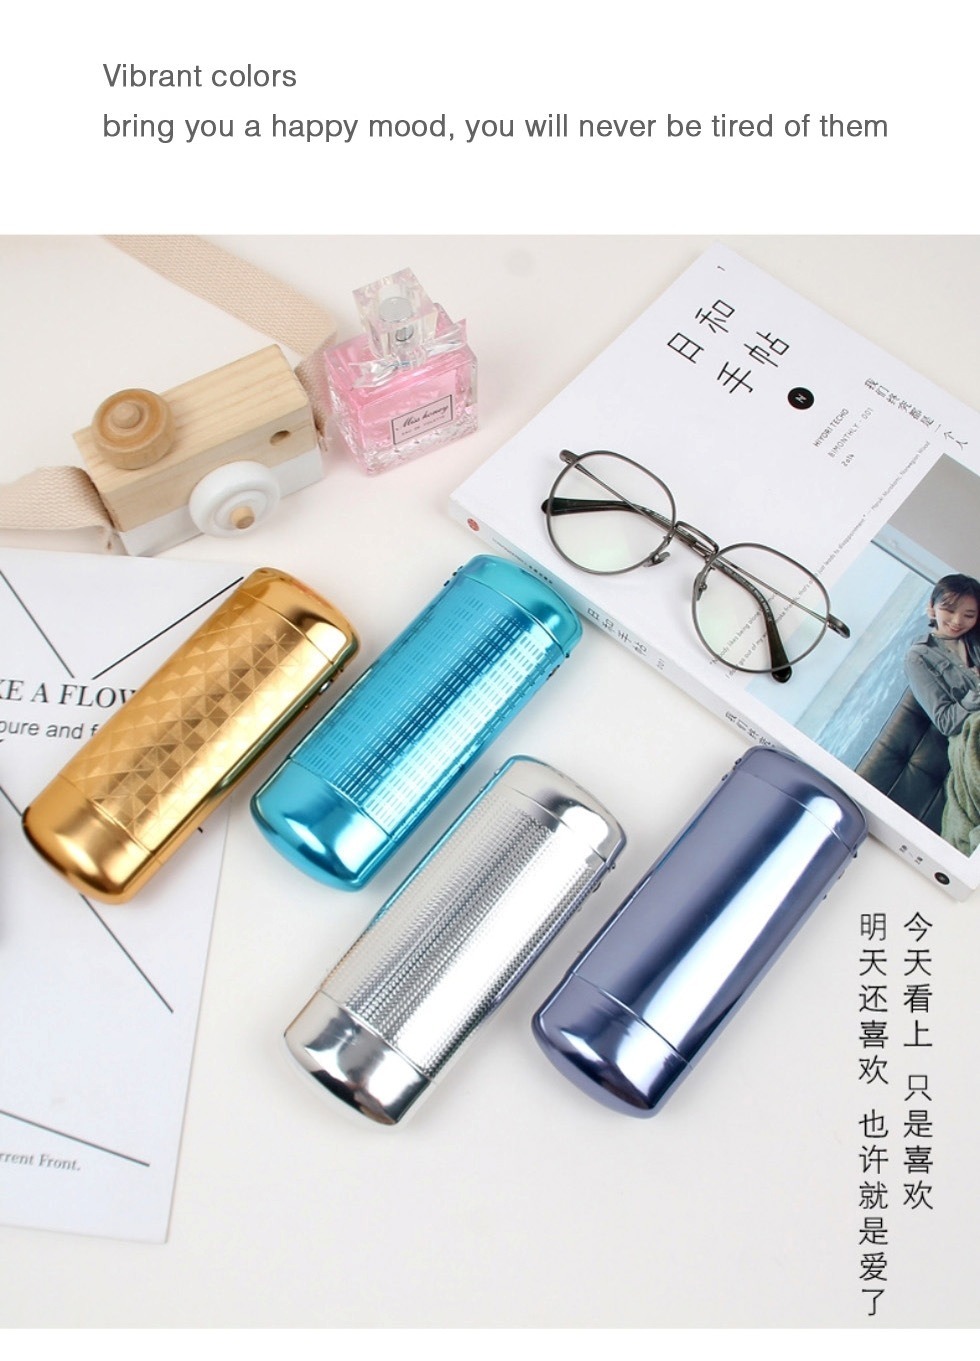 Lightweight Aluminium Hard Protective Case for Reading Glasses and Sunglasses; Engraved Compact Metallic Eyewear Case